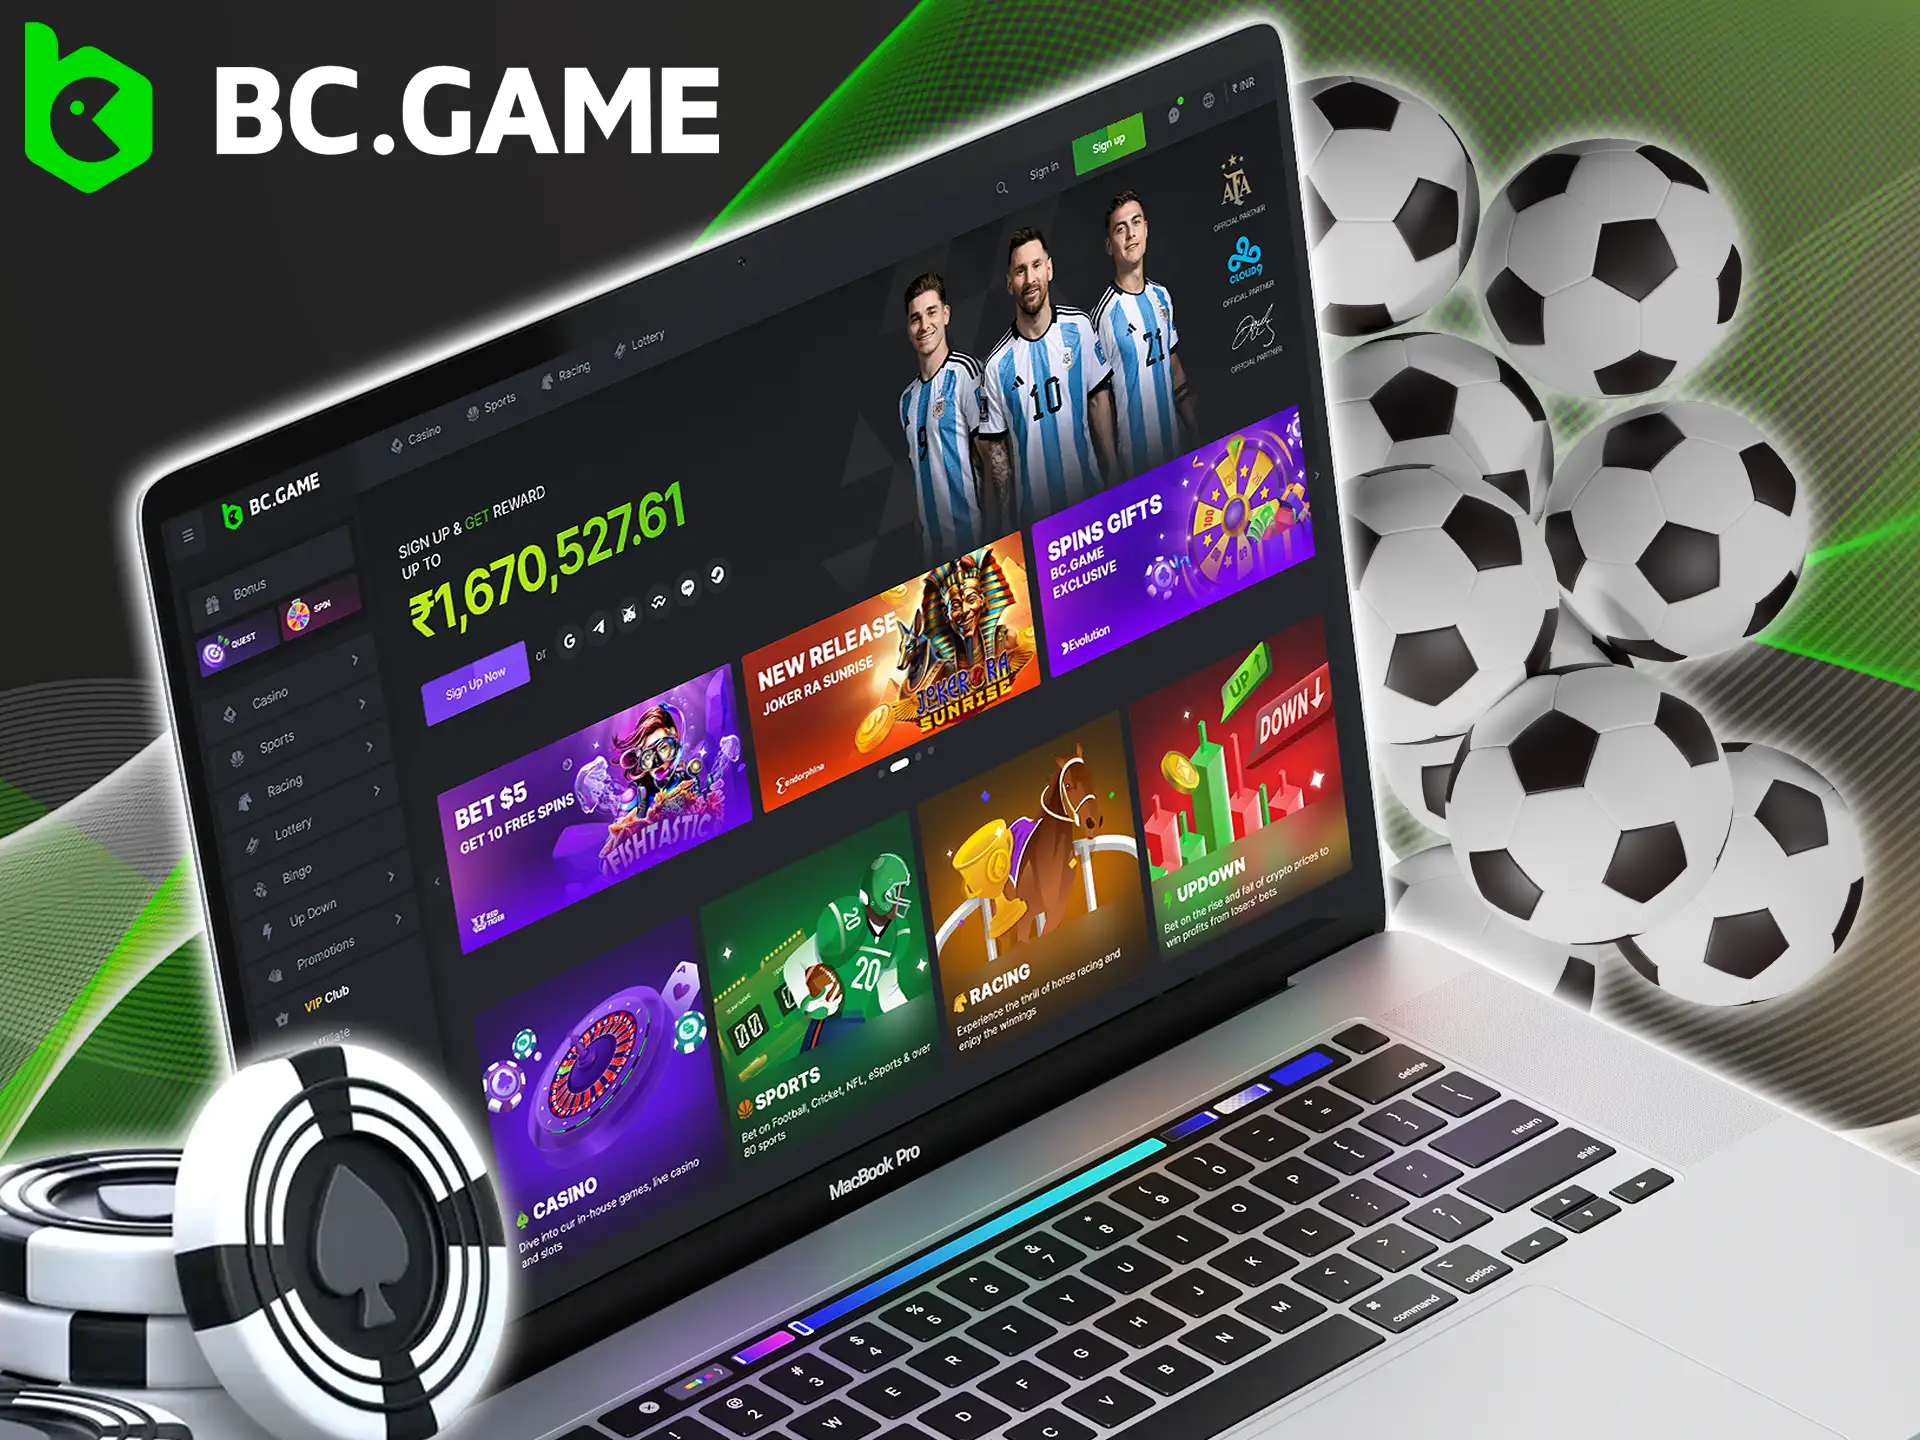 BC Game provides a large selection of games, 24/7 support and a variety of cryptocurrency options.